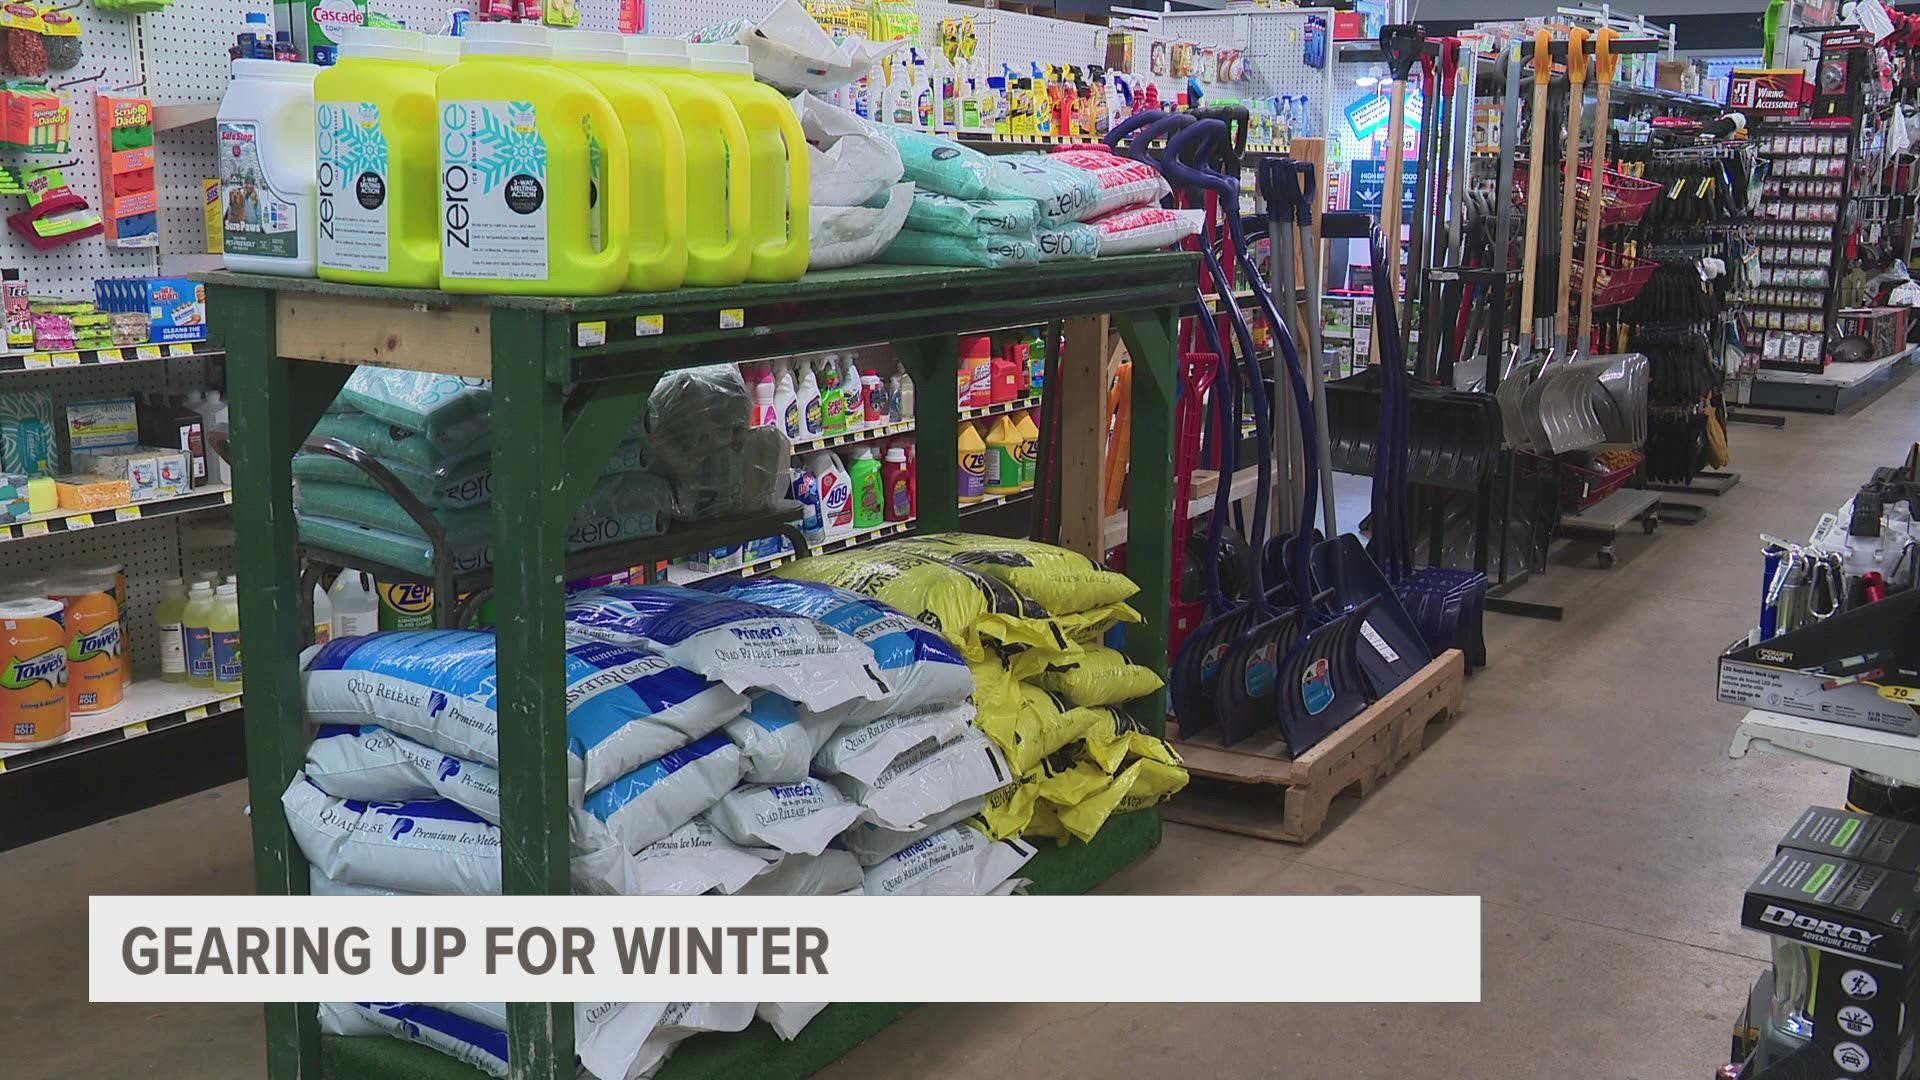 Alger Hardware was full of people buying shovels, snow scrapers, snow blowers for first Grand Rapids snowfall.